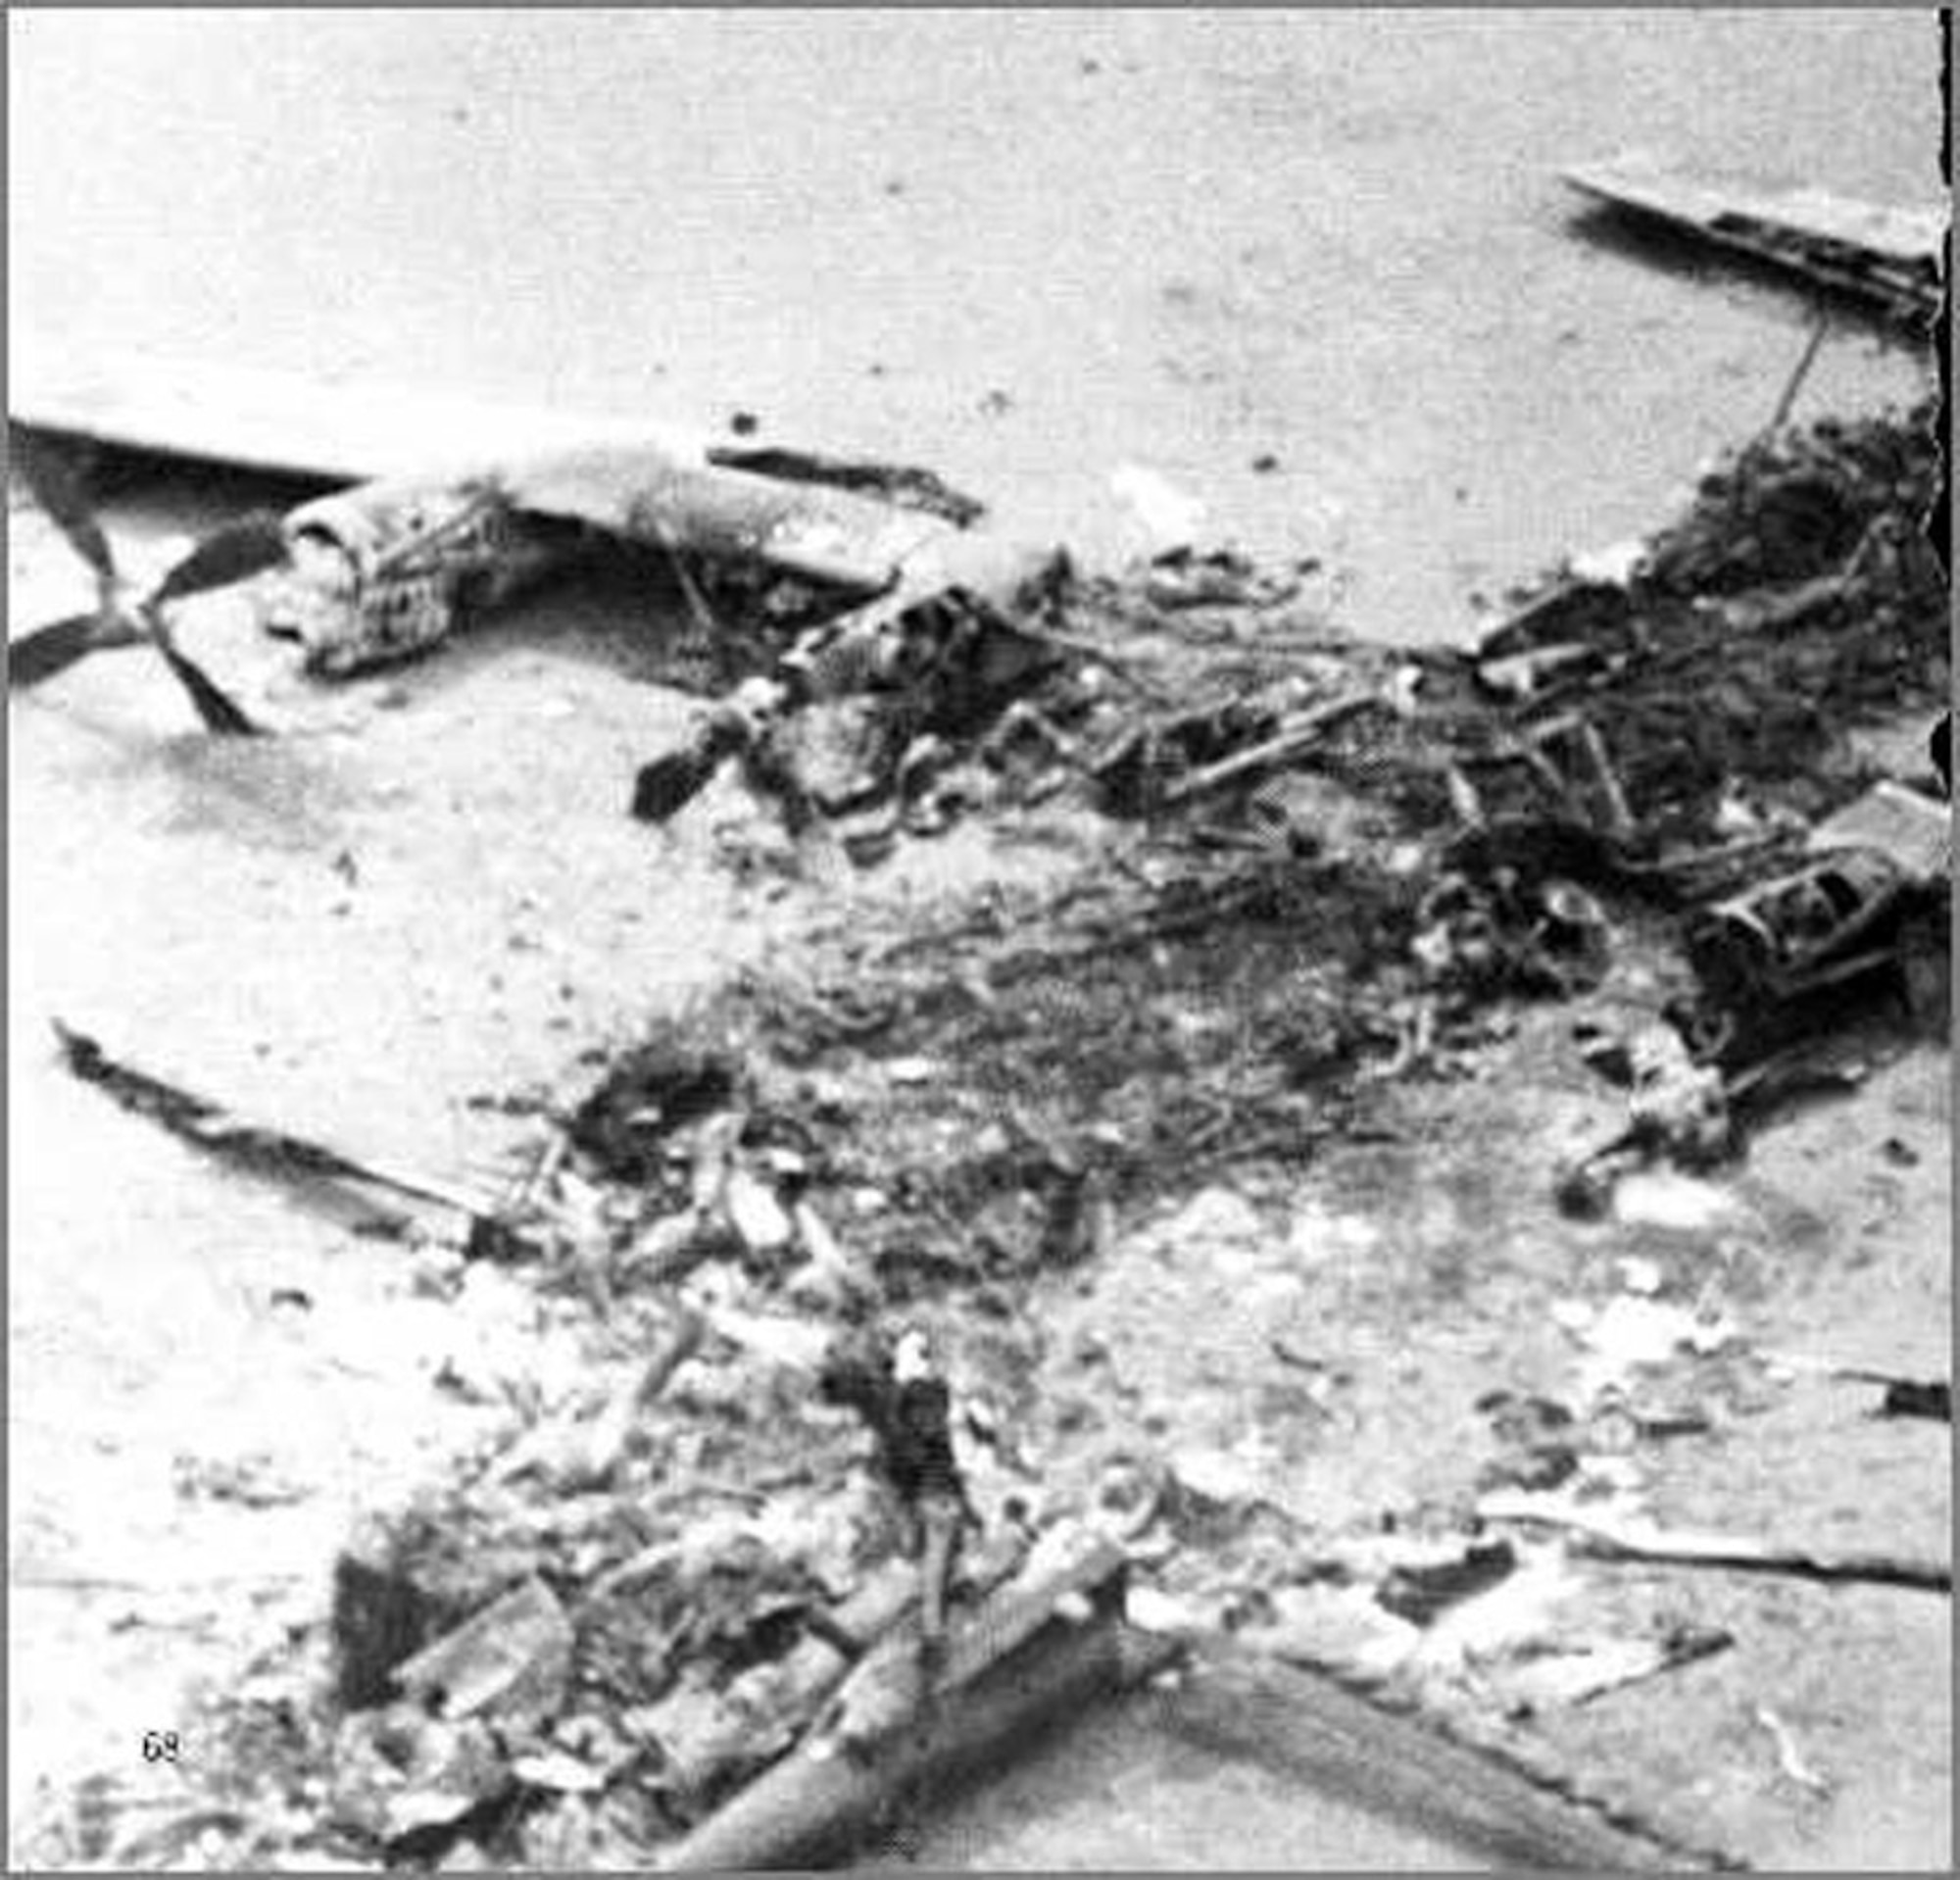 The wreckage that was left after the helicopter and C-130 collided in the desert during Operation Eagle Claw April 25, 1980. (Courtesy photo)